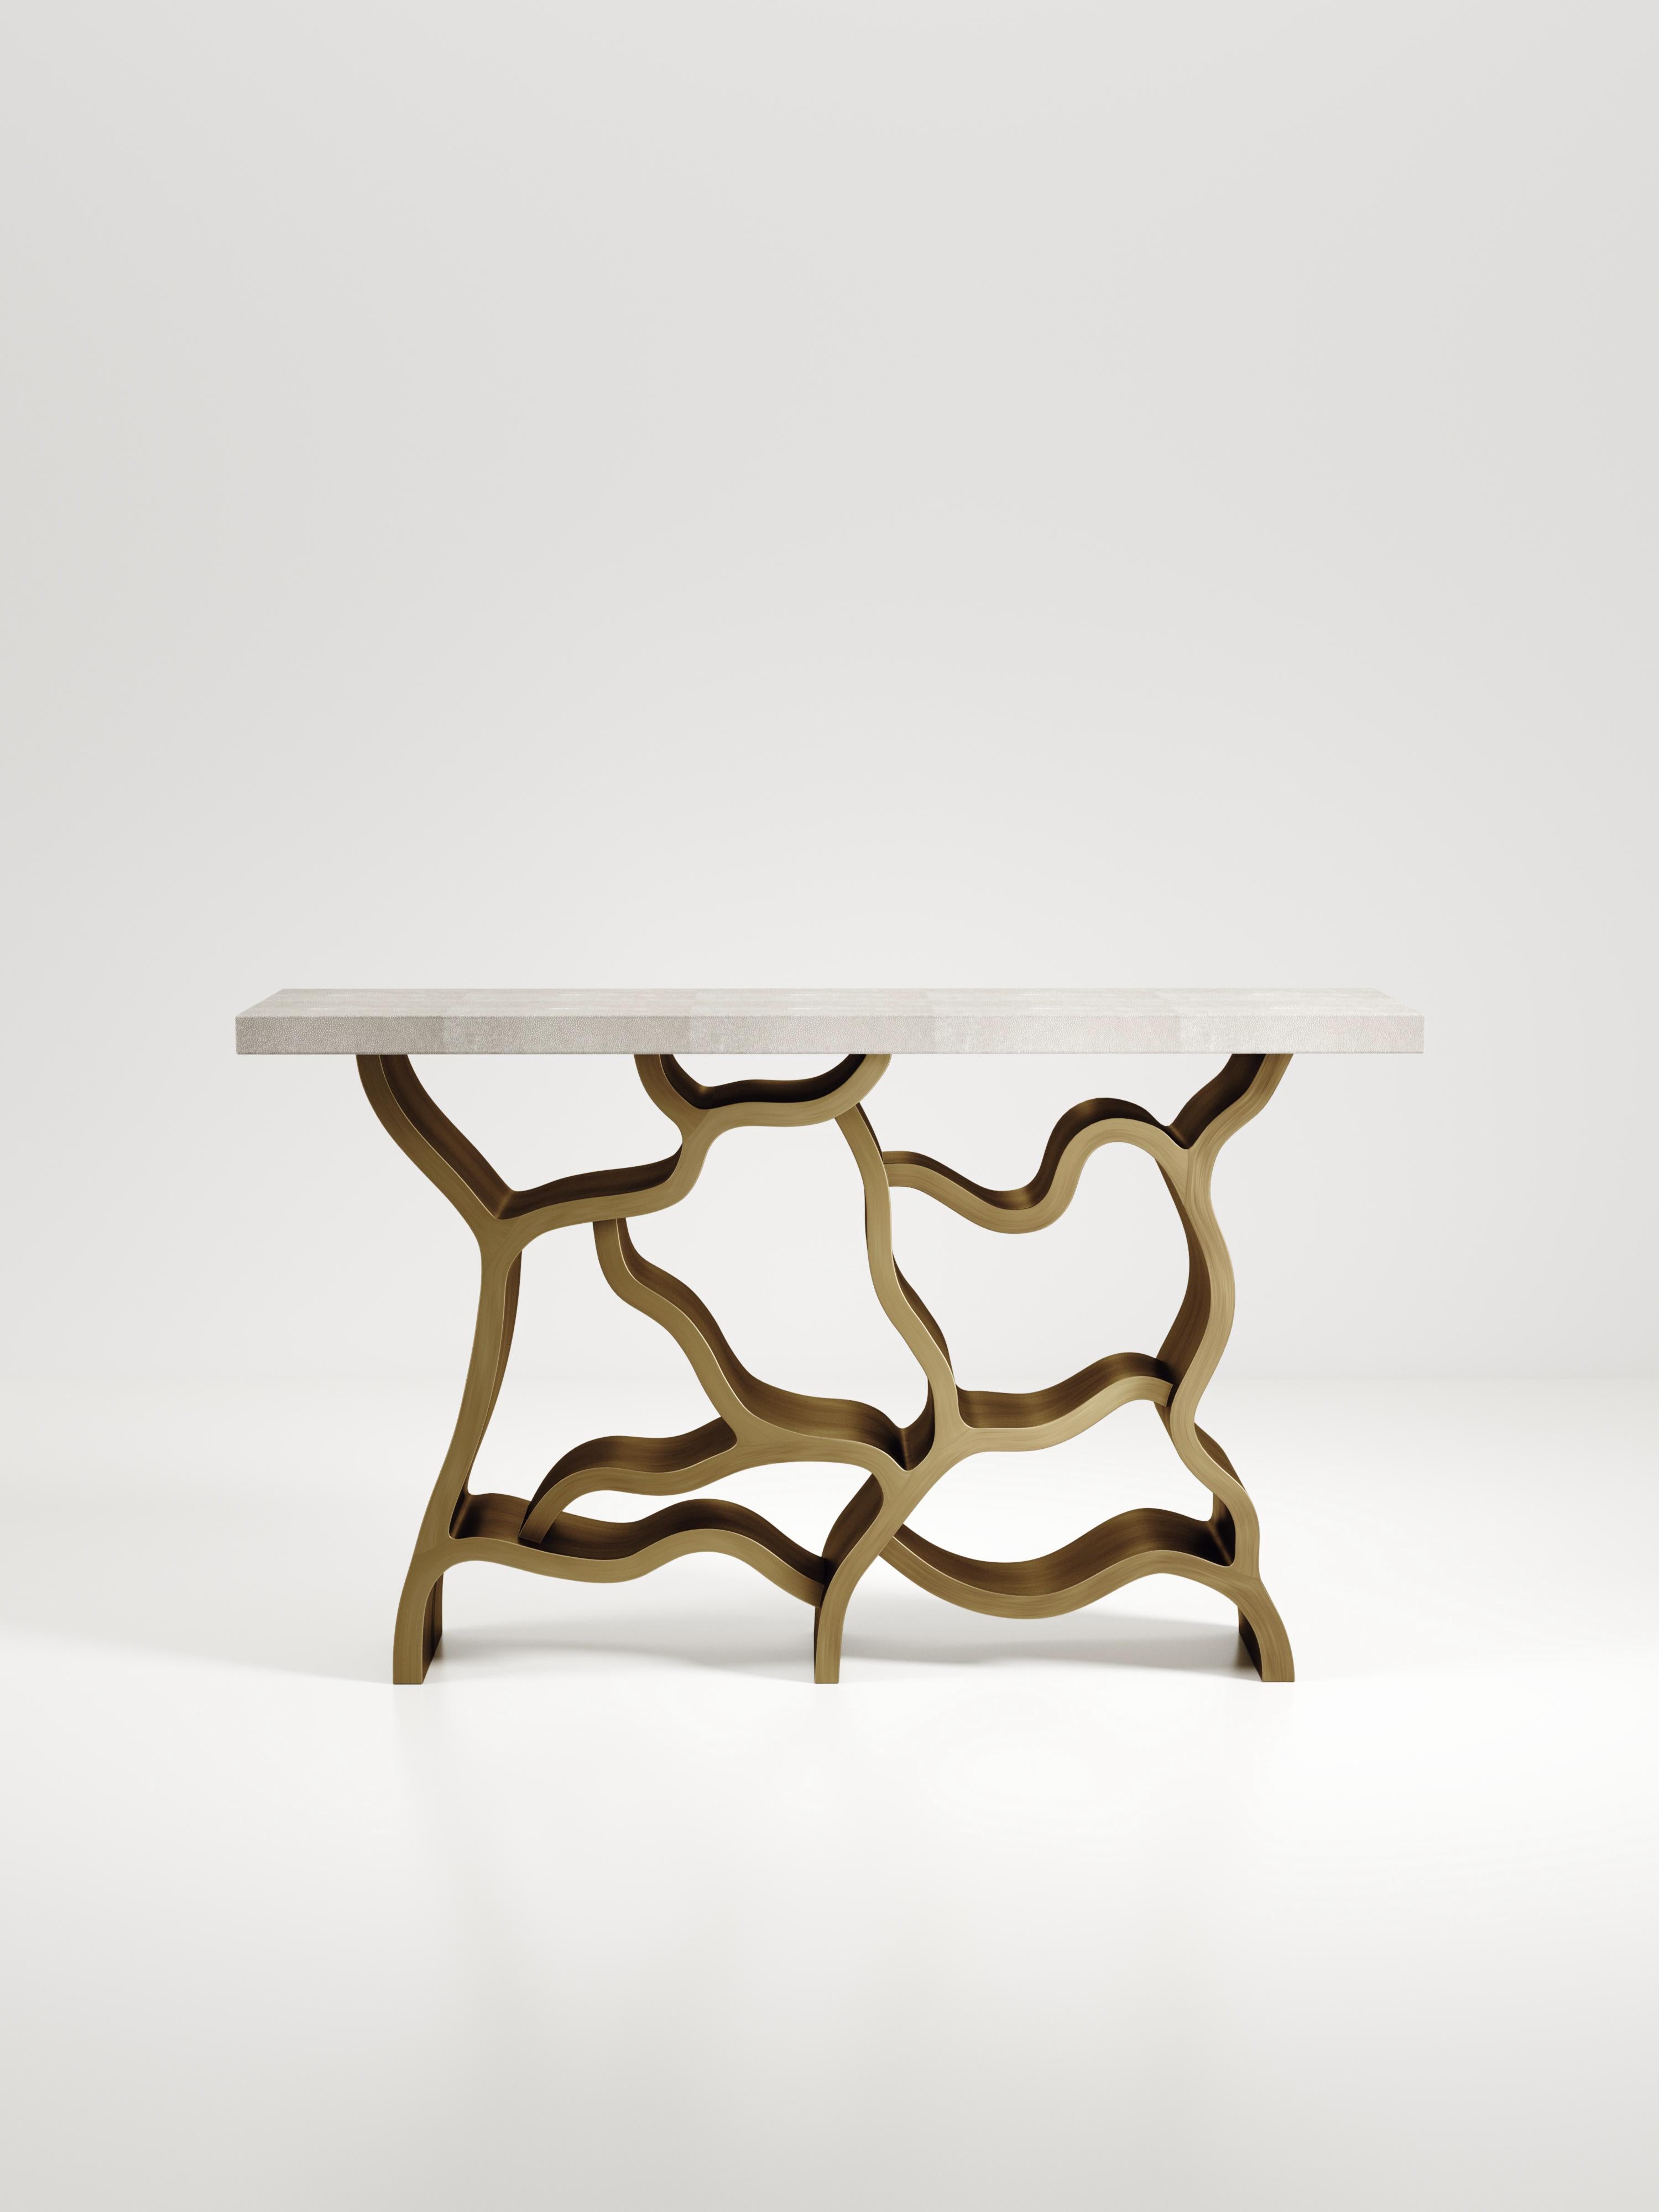 The Leaf Console Table by Kifu Paris is a dramatic and organic piece. The cream shagreen inlaid rectangle top sits on a striking bronze-patina brass base that emulates intertwining branches. This piece is designed by Kifu Augousti the daughter of